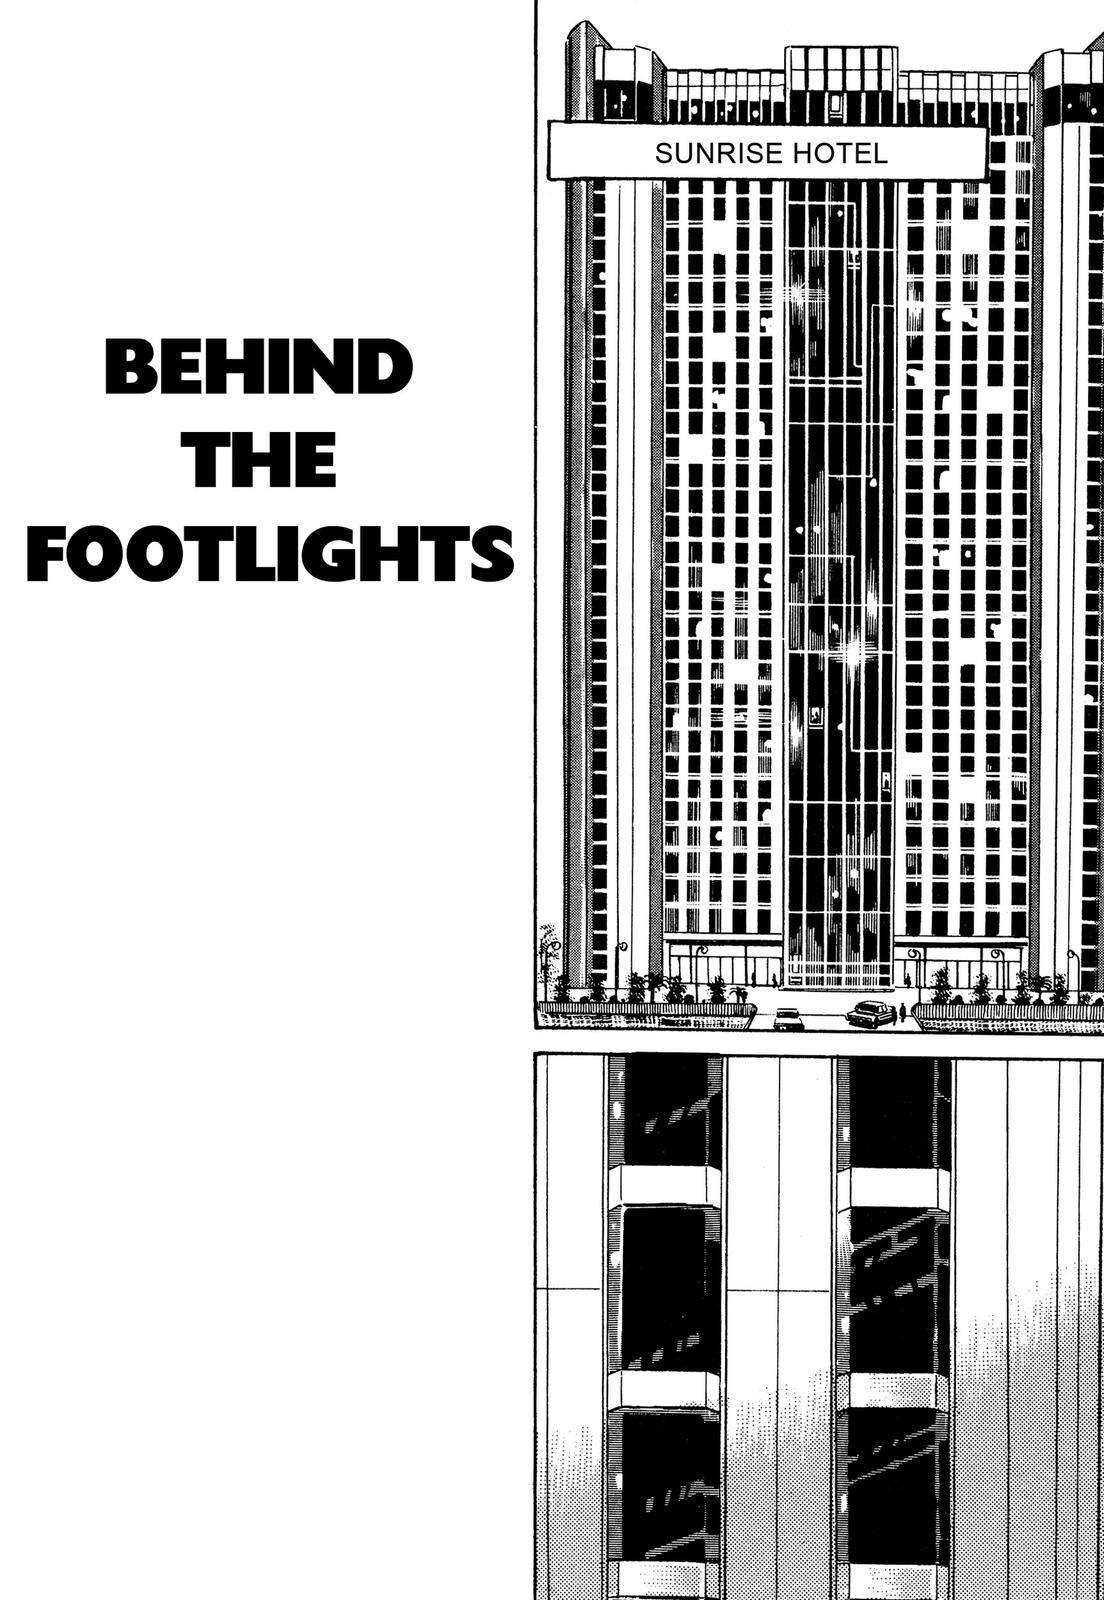 Doll: The Hotel Detective Vol. 1 Ch. 5 Behind the Footlights